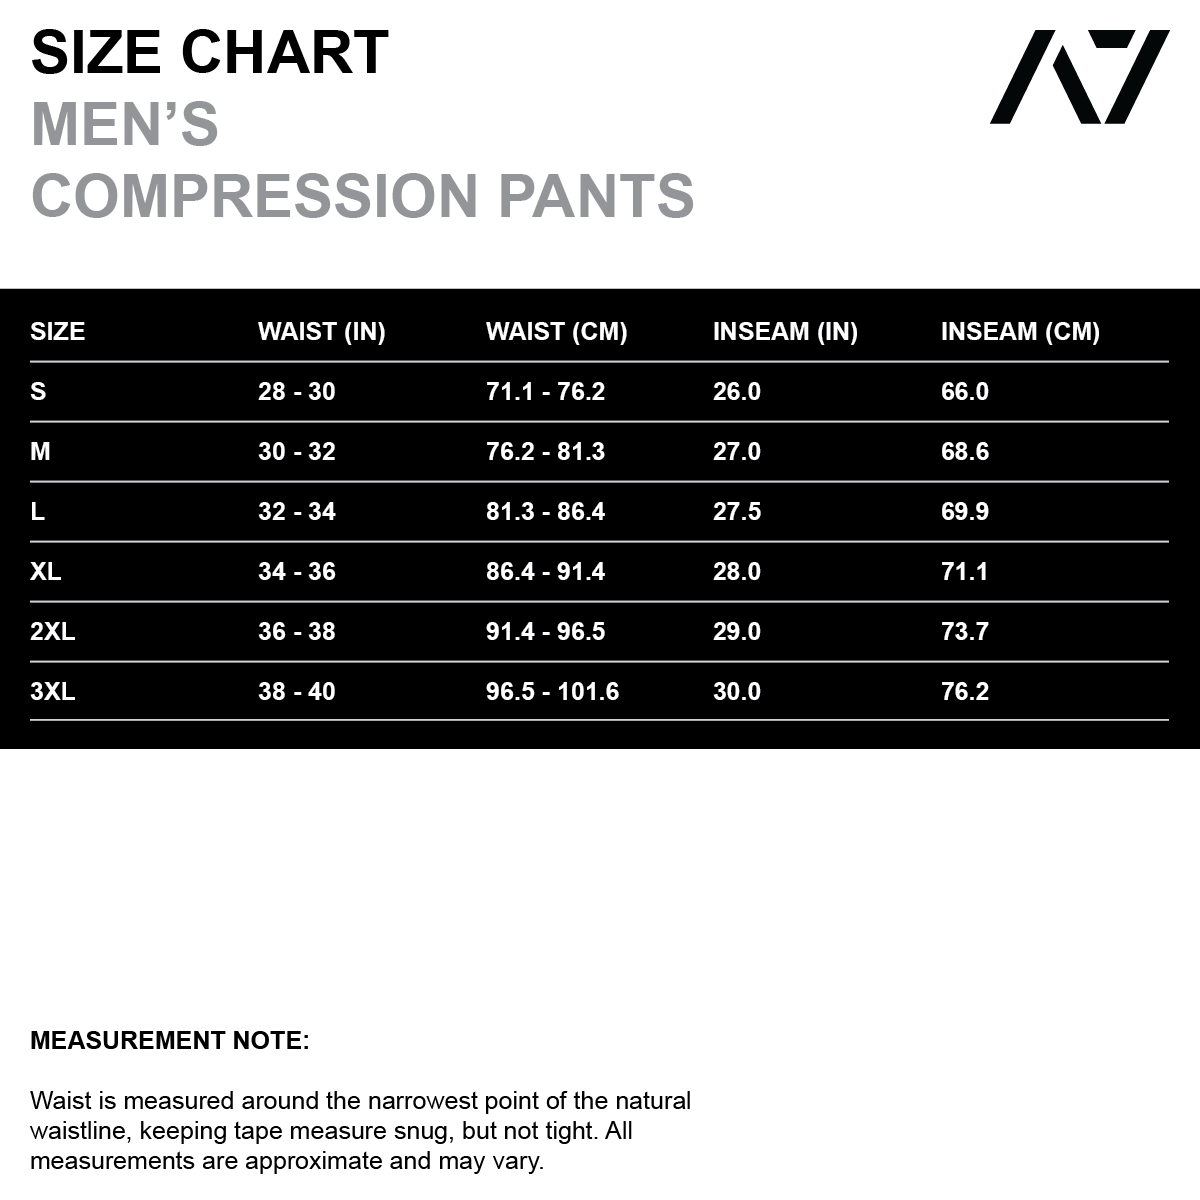 Compression pants for the powerlifter and weightlifter. Perfect powerlifting apparel providing maximum comfort. A7 has IPF approved powerlifting apprel and is perfect for Powerlifring, weightlifting, strongman and all your strength sports needs. Shipping to Europe and the UK, Norway, Switzerland and Iceland.